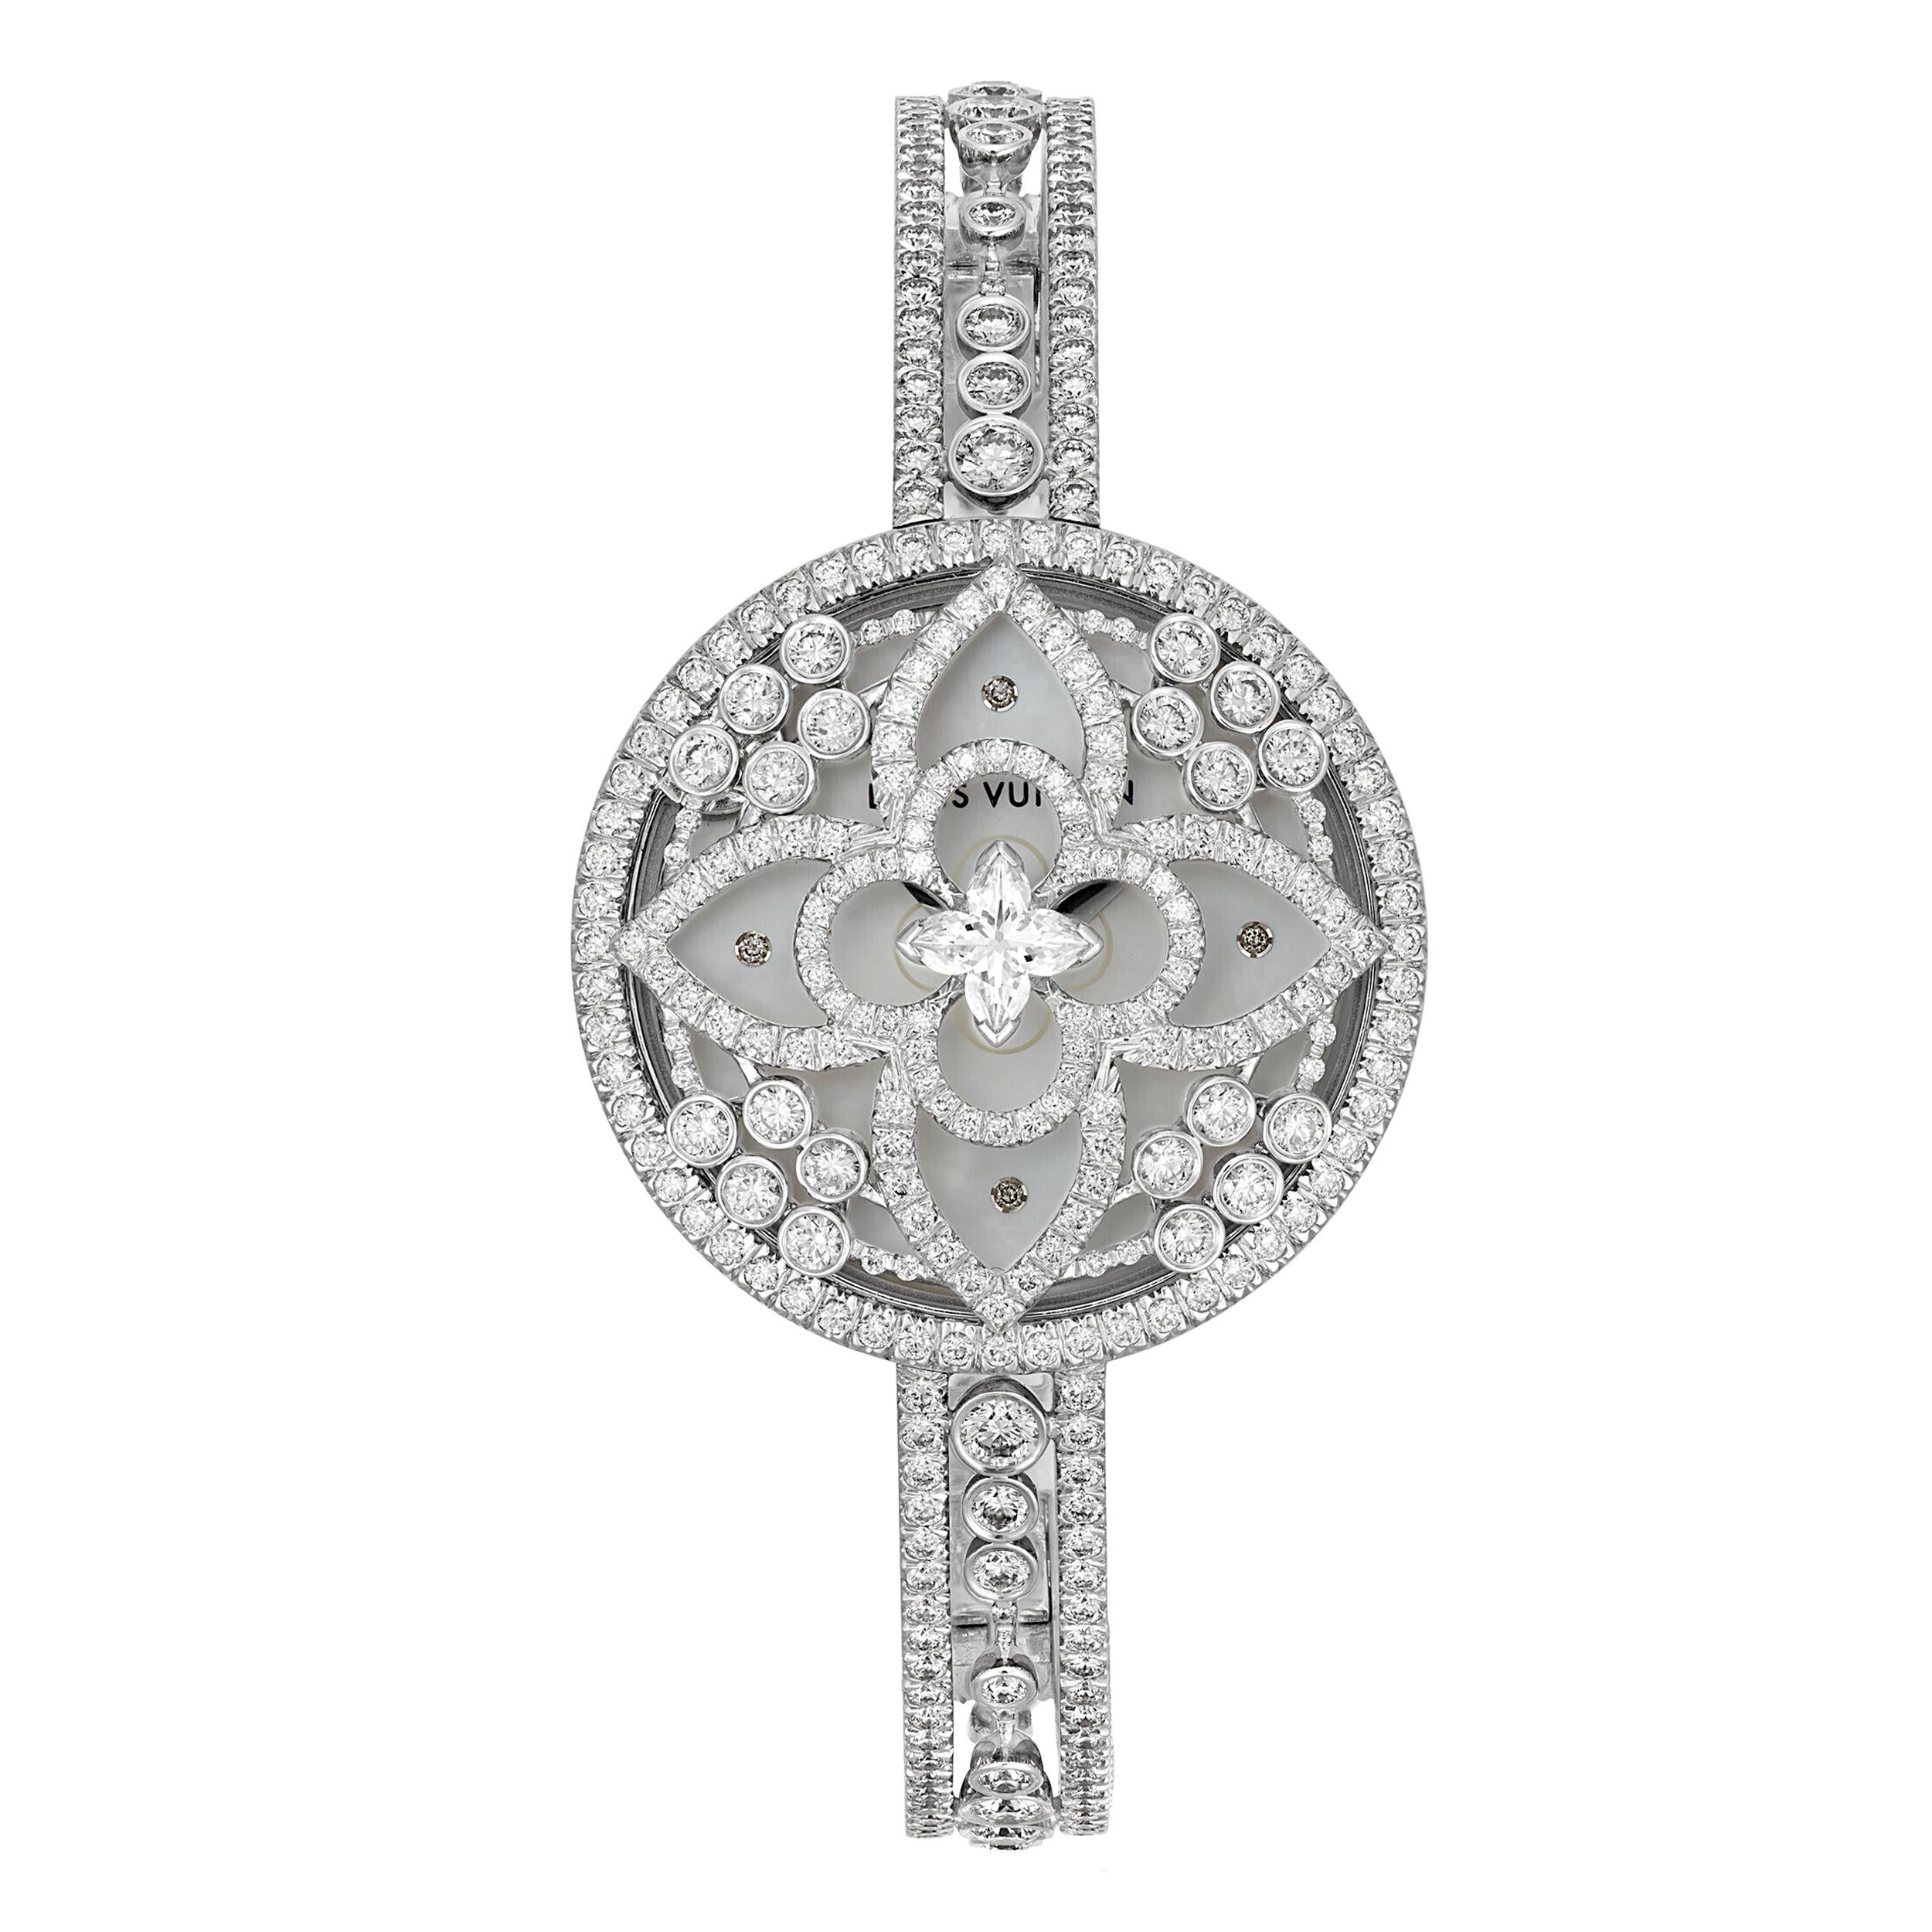 An unmistakable Louis Vuitton diamond watch showcasing a plethora of round brilliant cut diamonds 485, and one flower shaped diamond centrally located. 6.7ct TW This special and complicated designed diamond has more facets than a traditional round